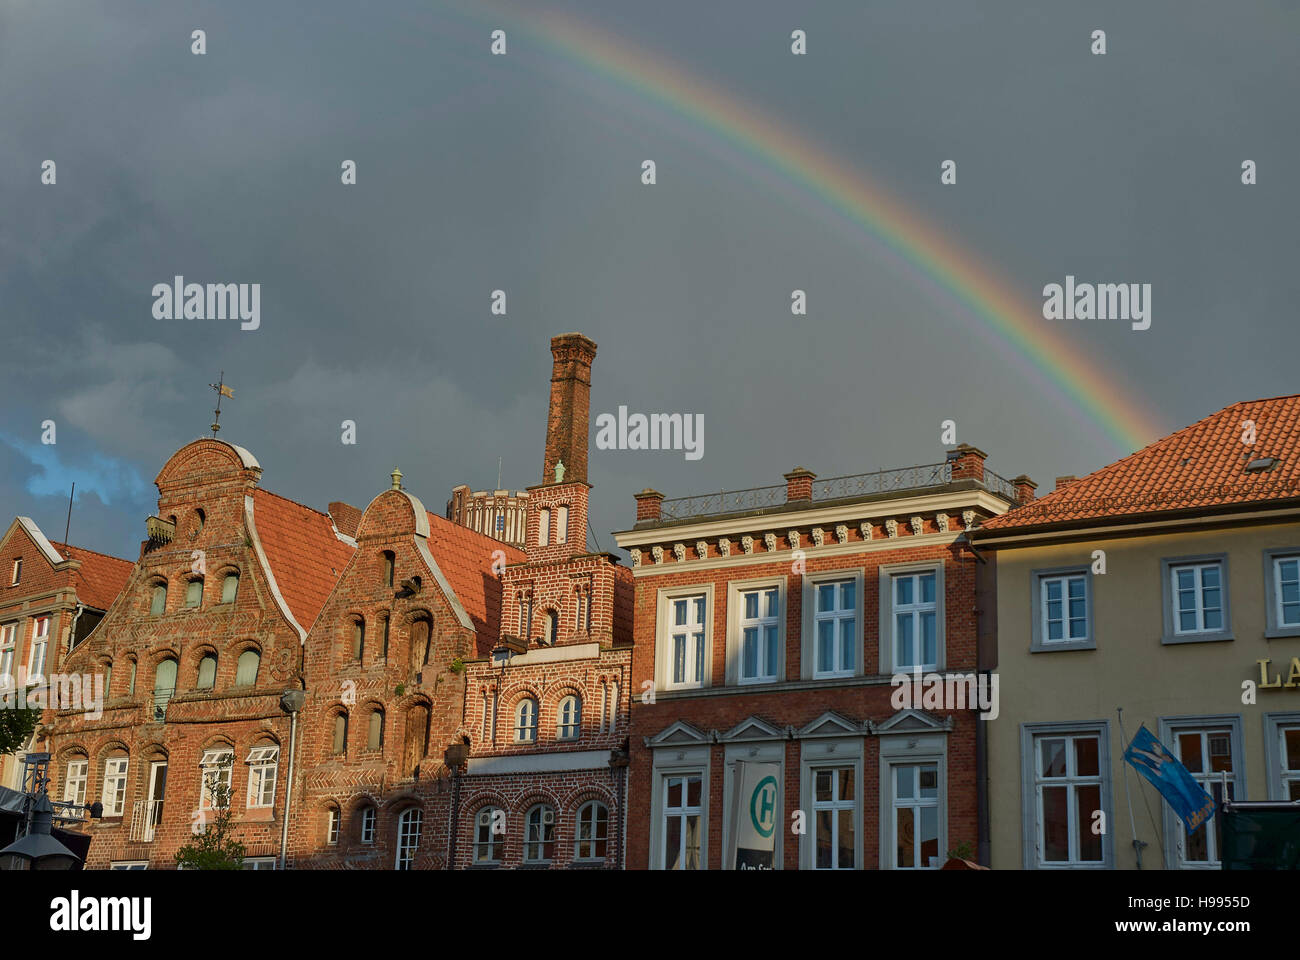 Old gothic brick architecture buildings in the historical city center of Lüneburg, Germany Stock Photo